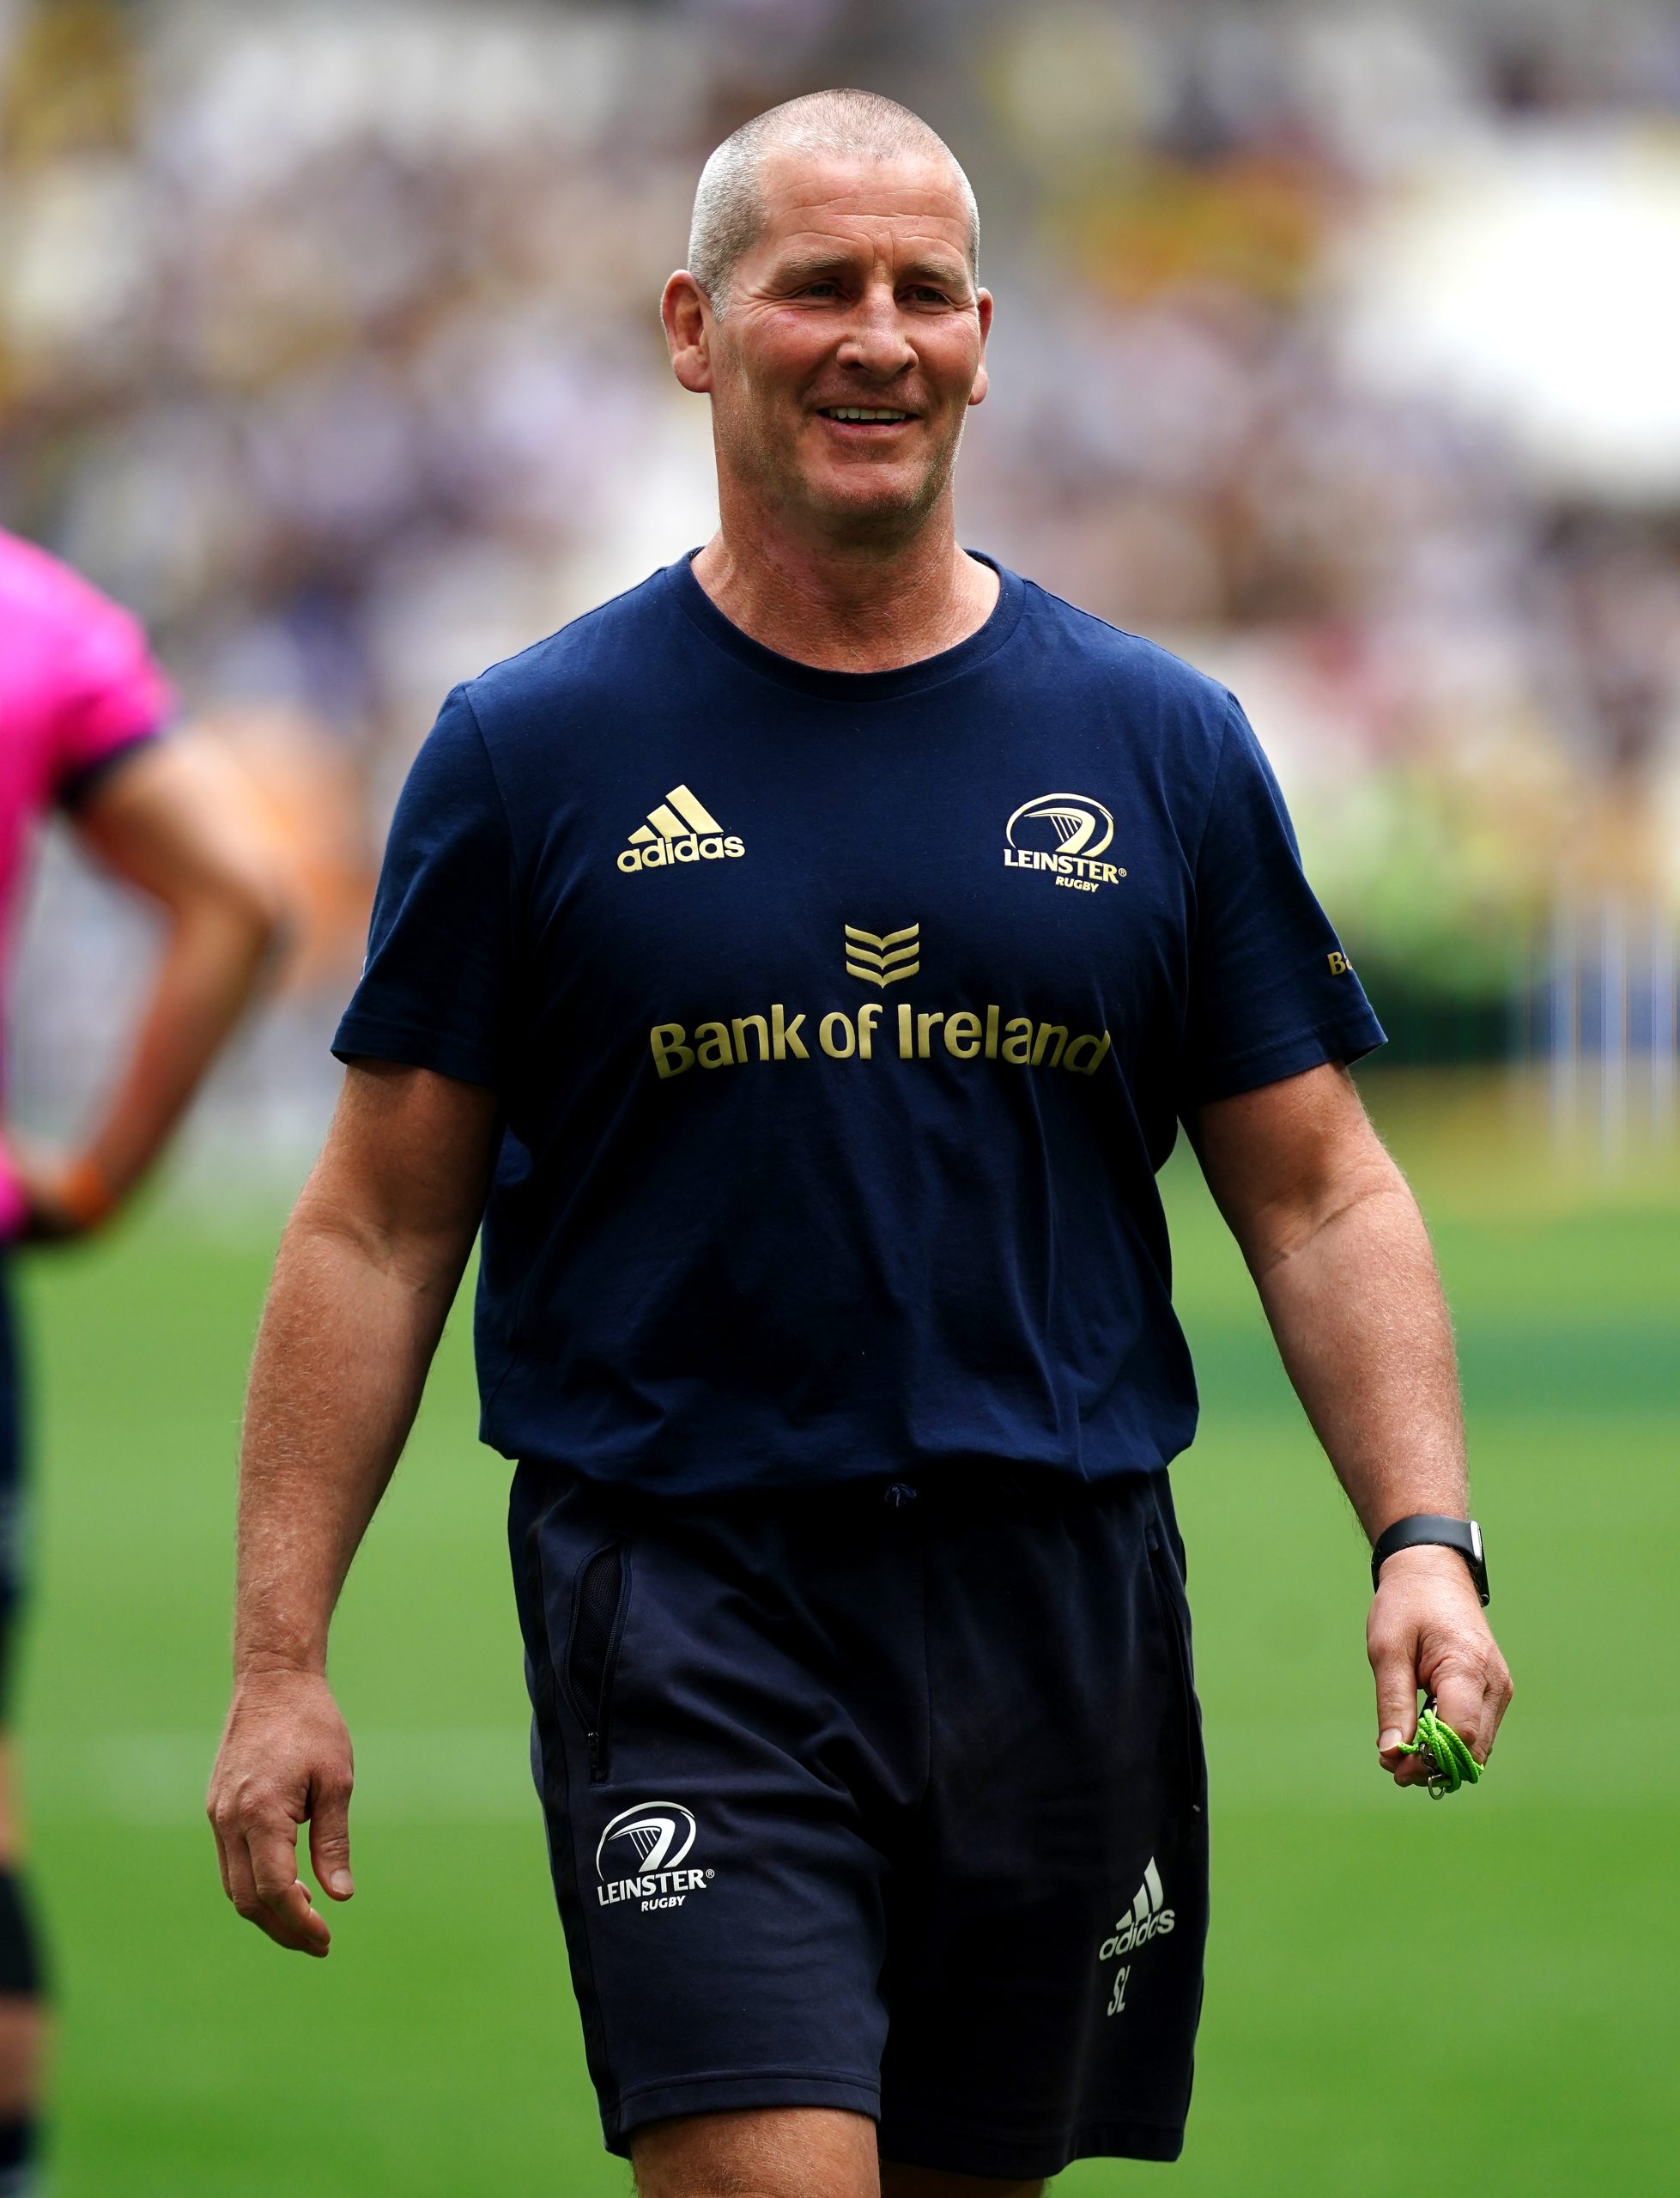 Stuart Lancaster will be missed at Leinster after making ‘massive impact’